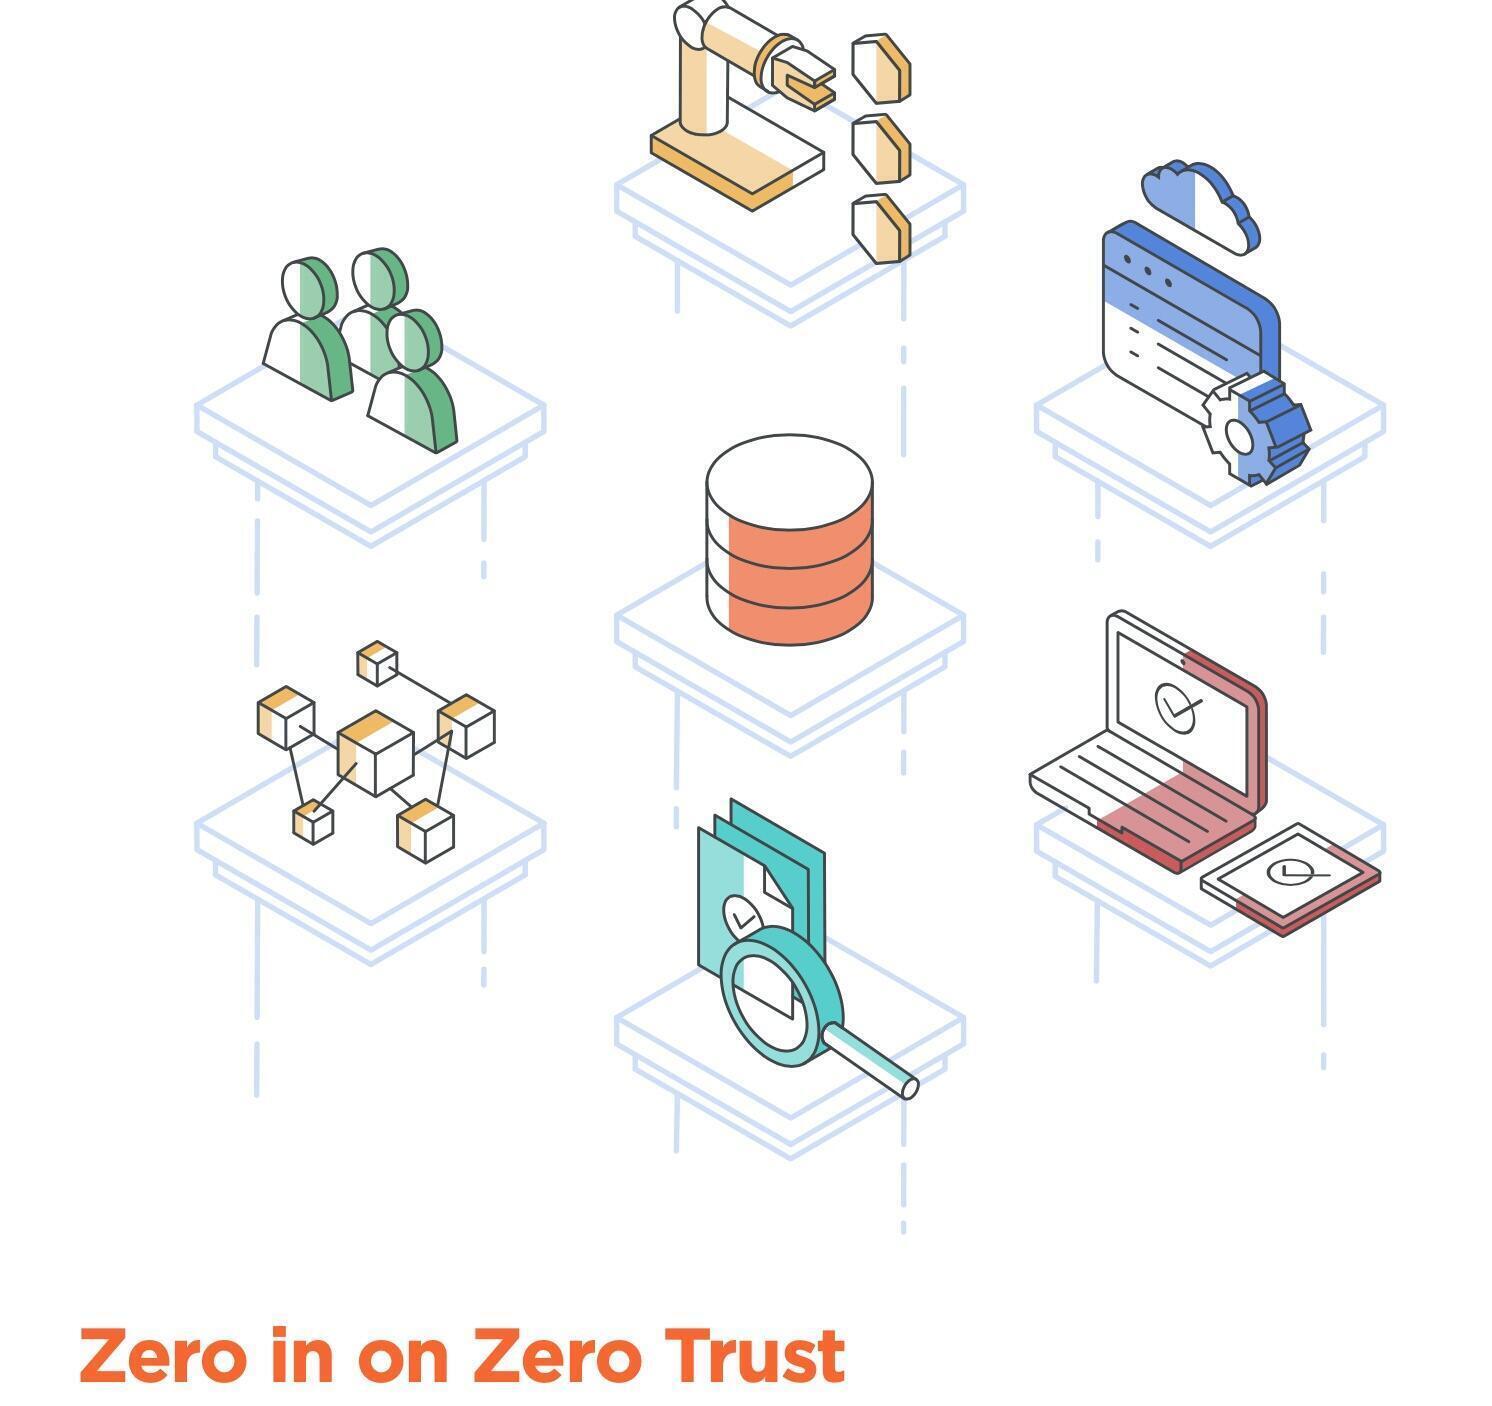 Cybersecurity: Organizations face key obstacles in adopting zero trust